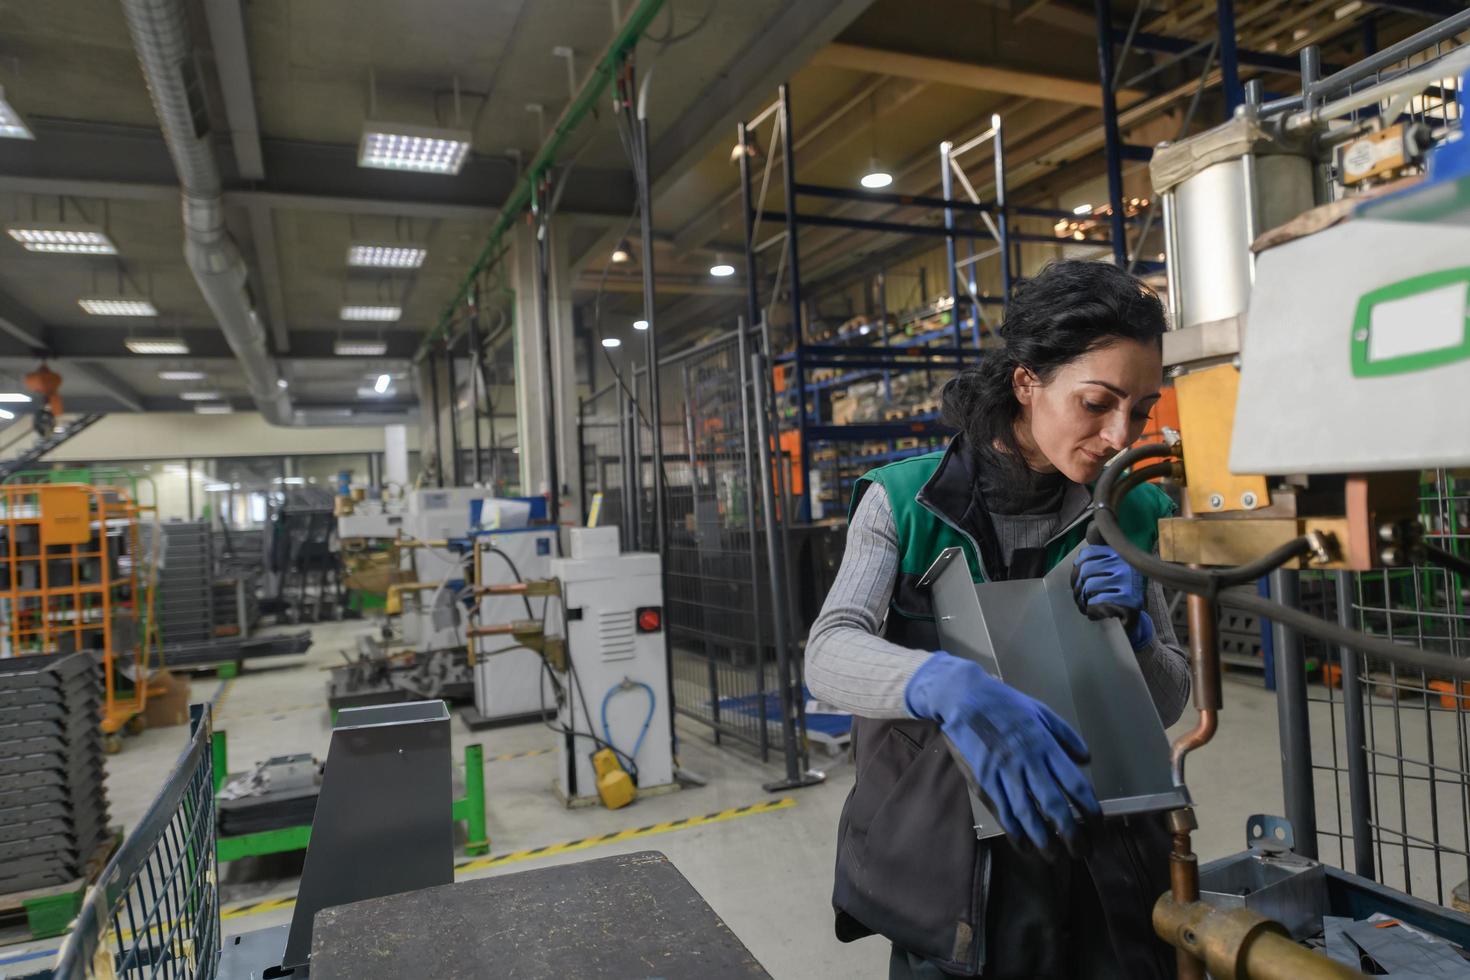 Turkey, 2022 - a woman working in a modern metal factory assembles parts for a new machine photo